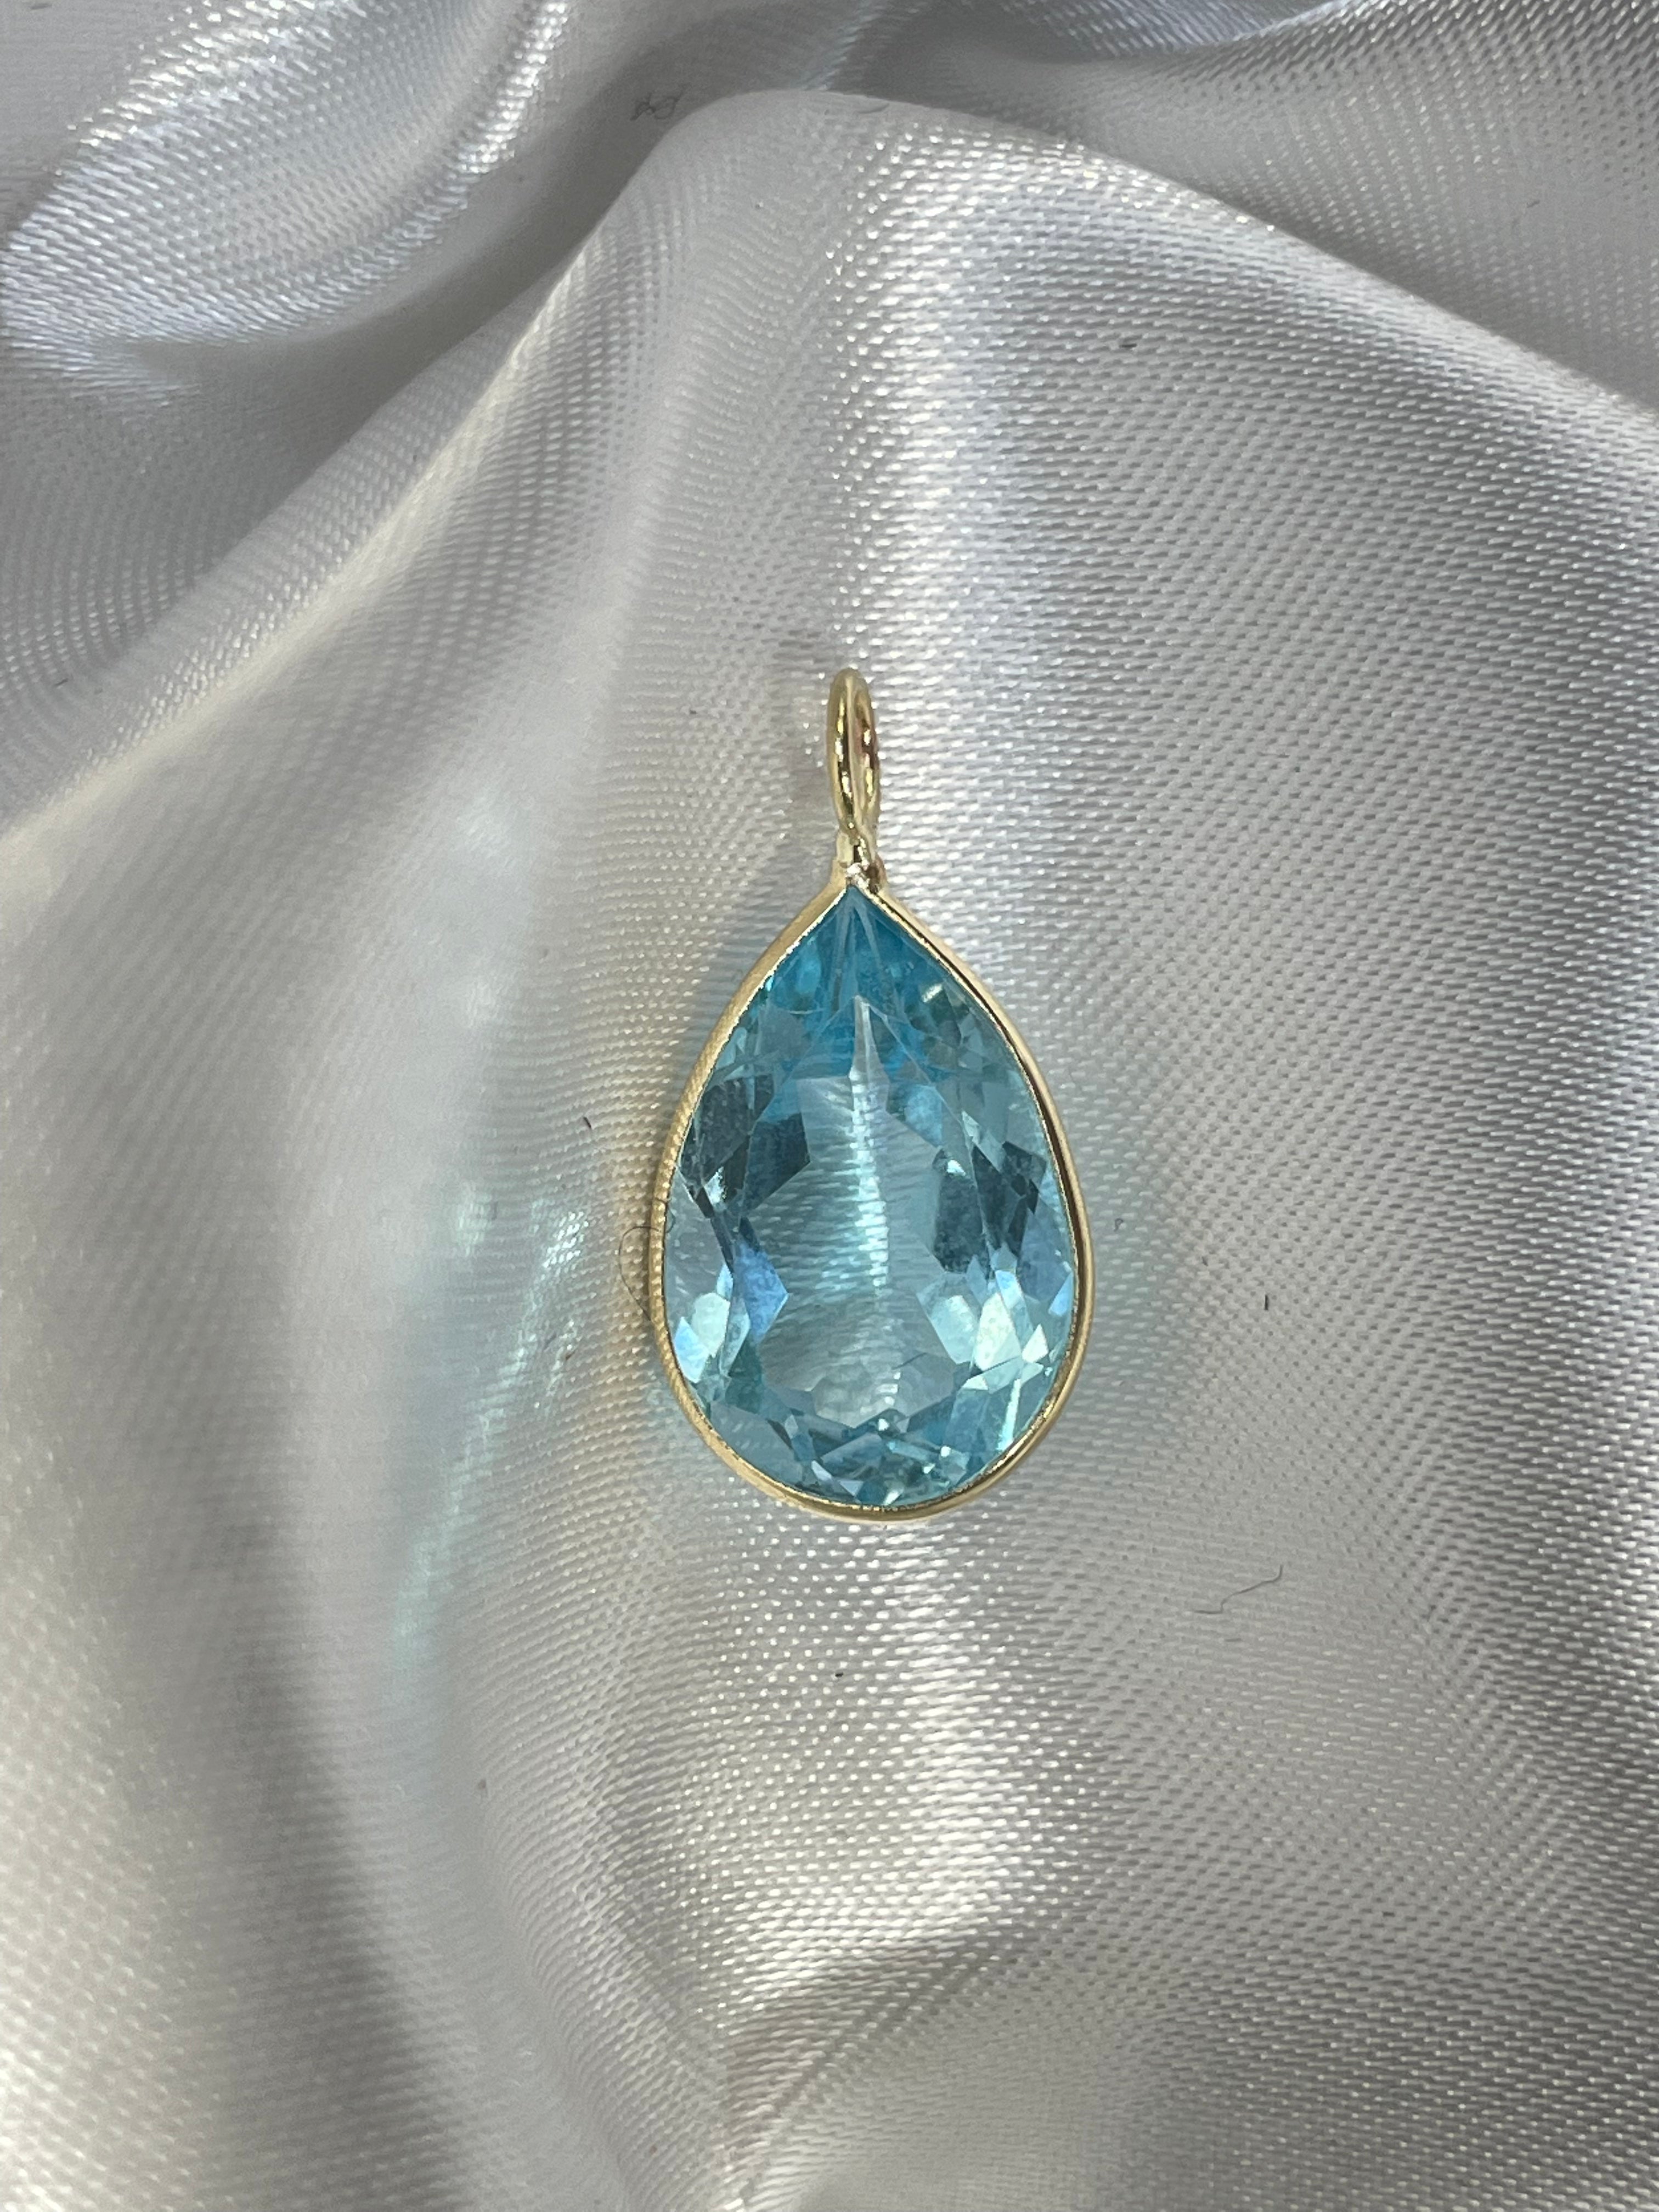 5CT Natural Blue Topaz Pear Shape Solid 14K Yellow Gold Charm Pendant 20x11mm